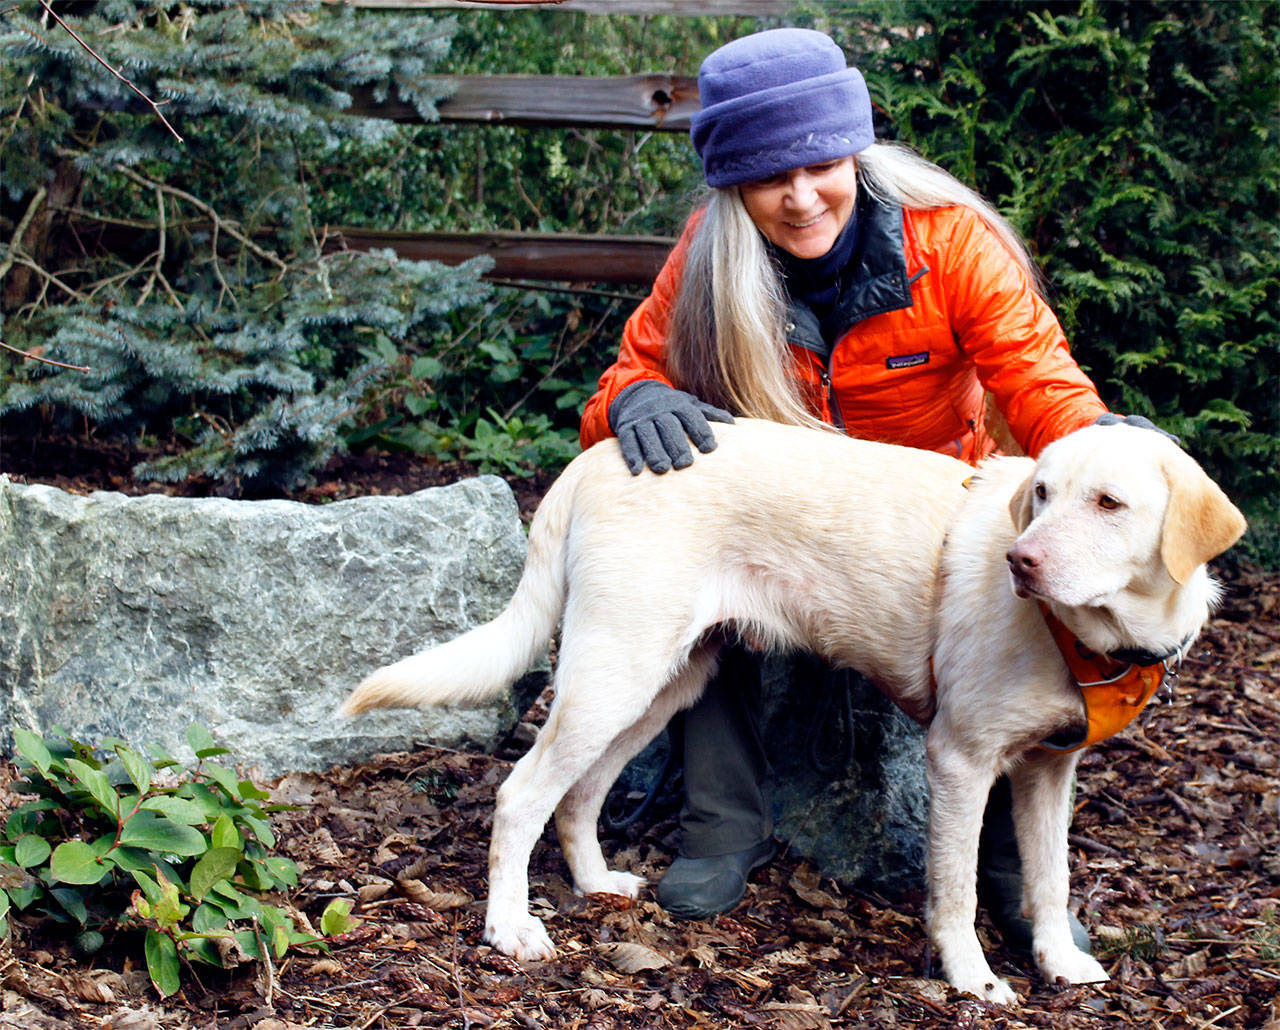 Elizabeth Johnson focuses her healing energy on rescue dog Wilbur. Her practice specializes in treating animals. Photo by Kira Erickson/Whidbey News-Times